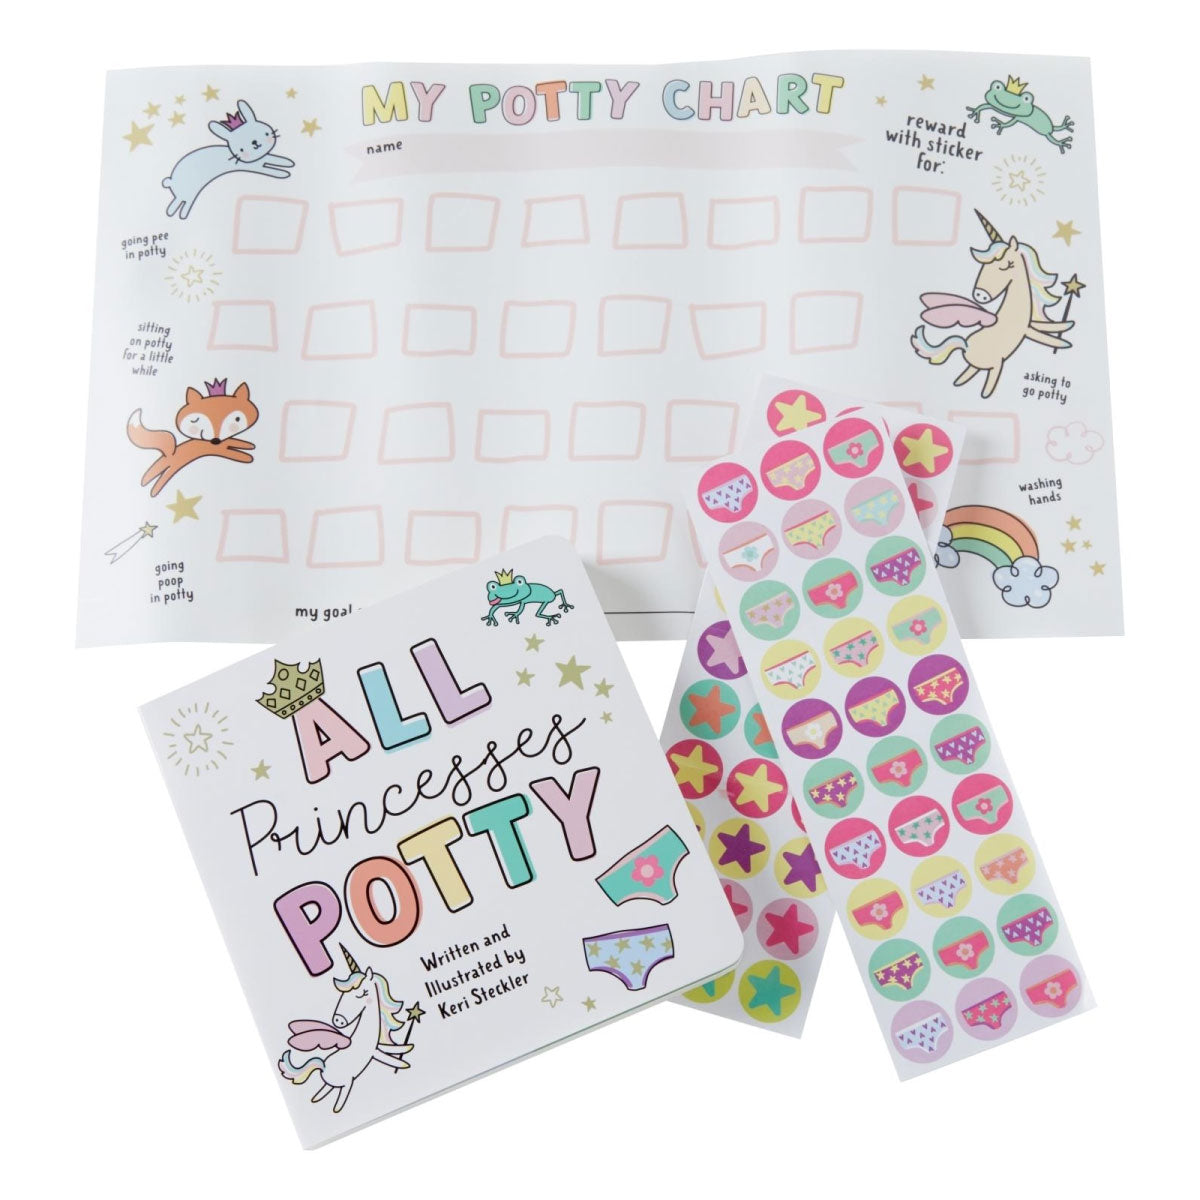 All Princesses Potty Book and Training Chart Set